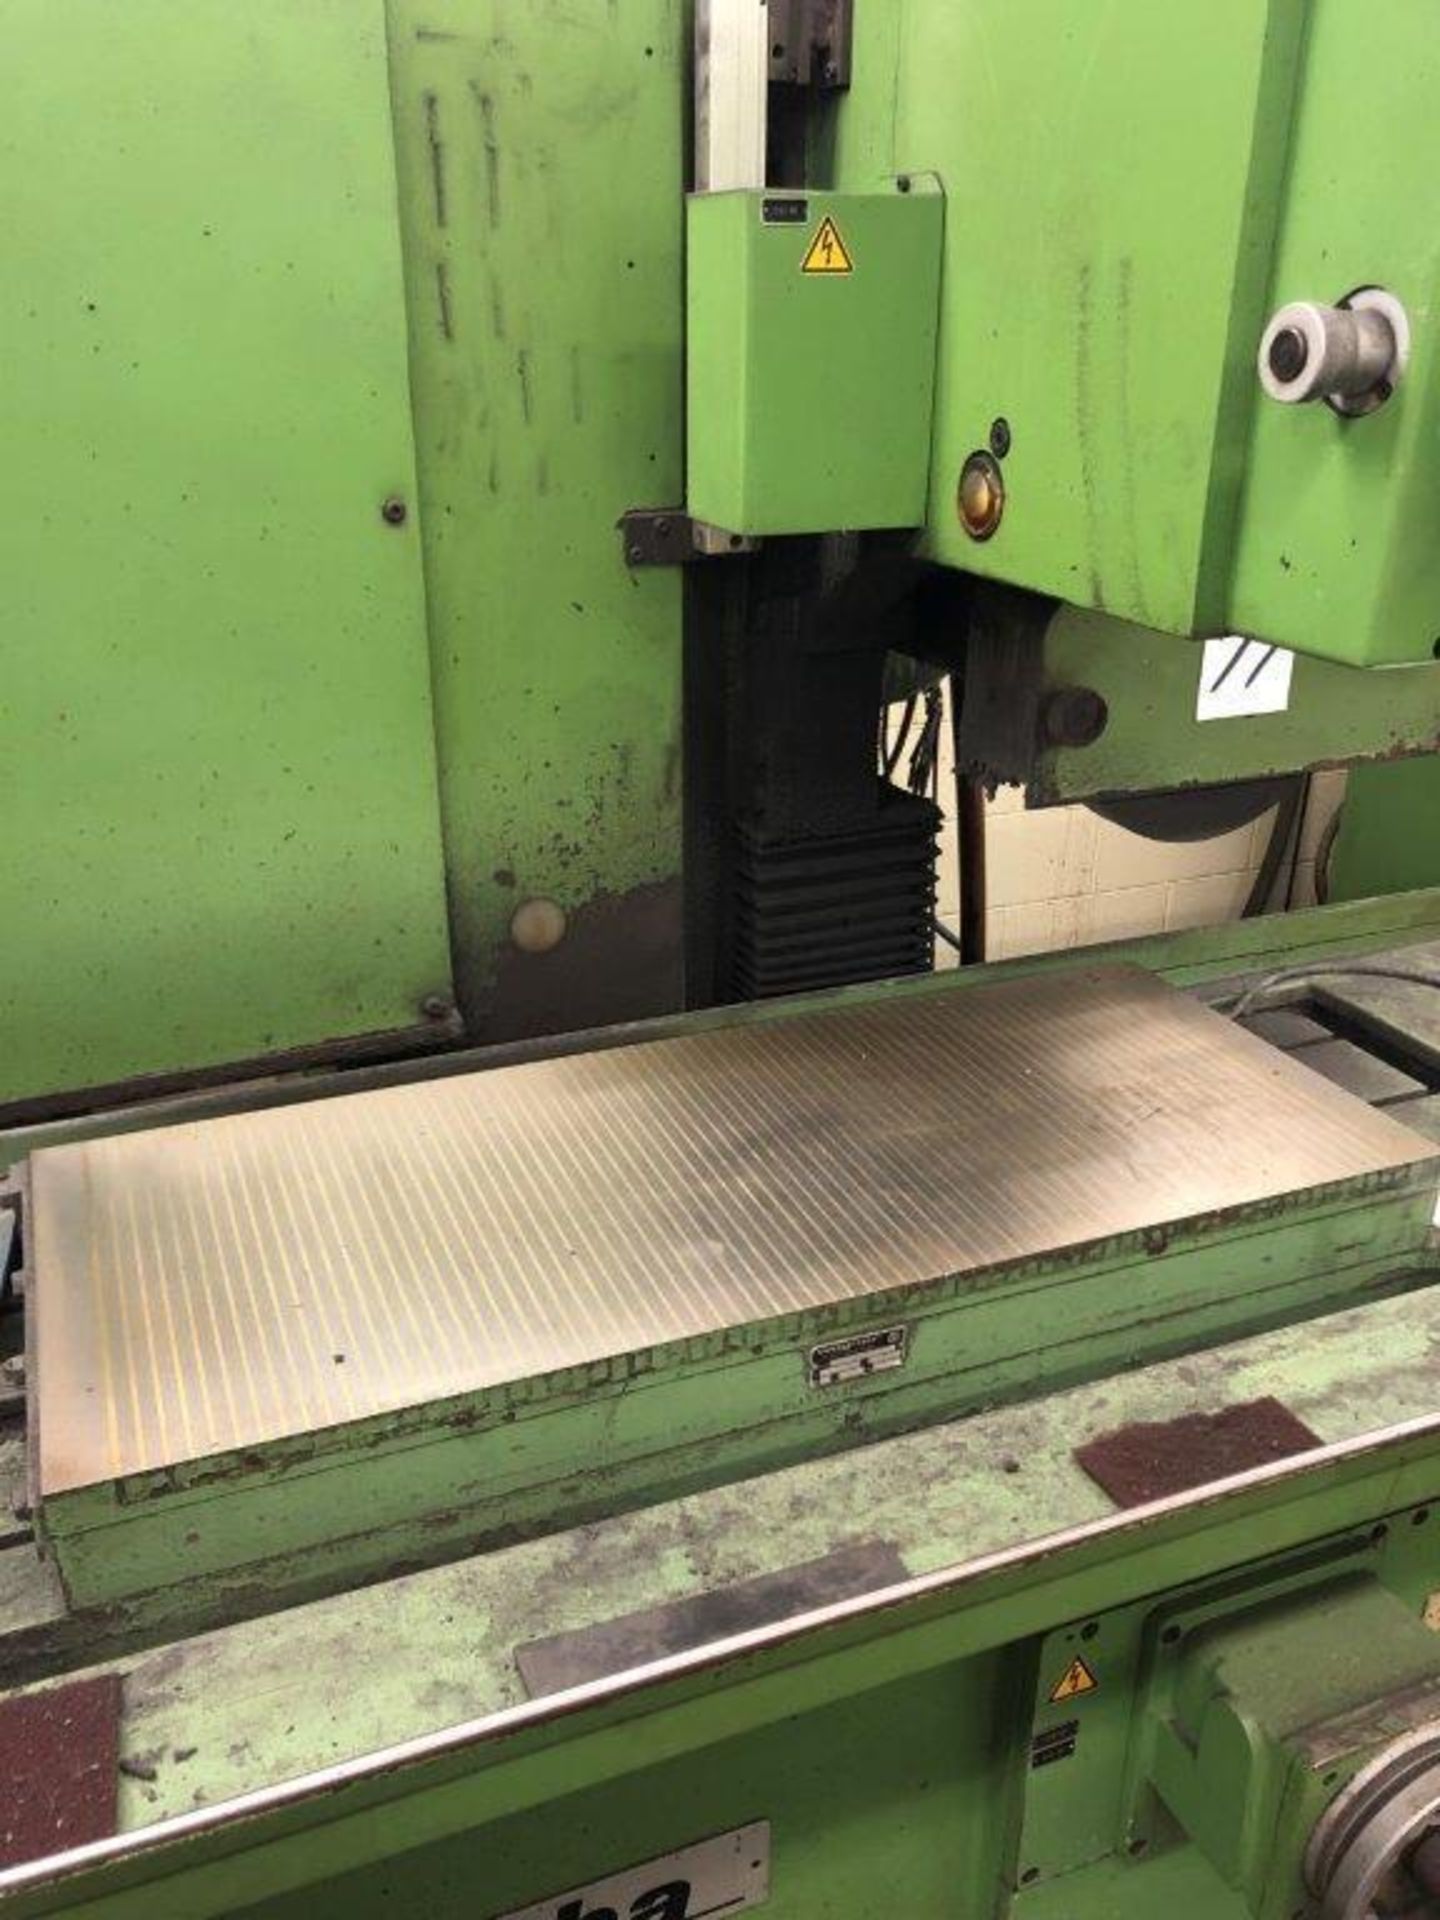 Aba FFU 1000/50 Surface Grinder, S/N 207990 (New 1986), 15.75" x 39" Electro-Magnetic Chuck - Image 6 of 10